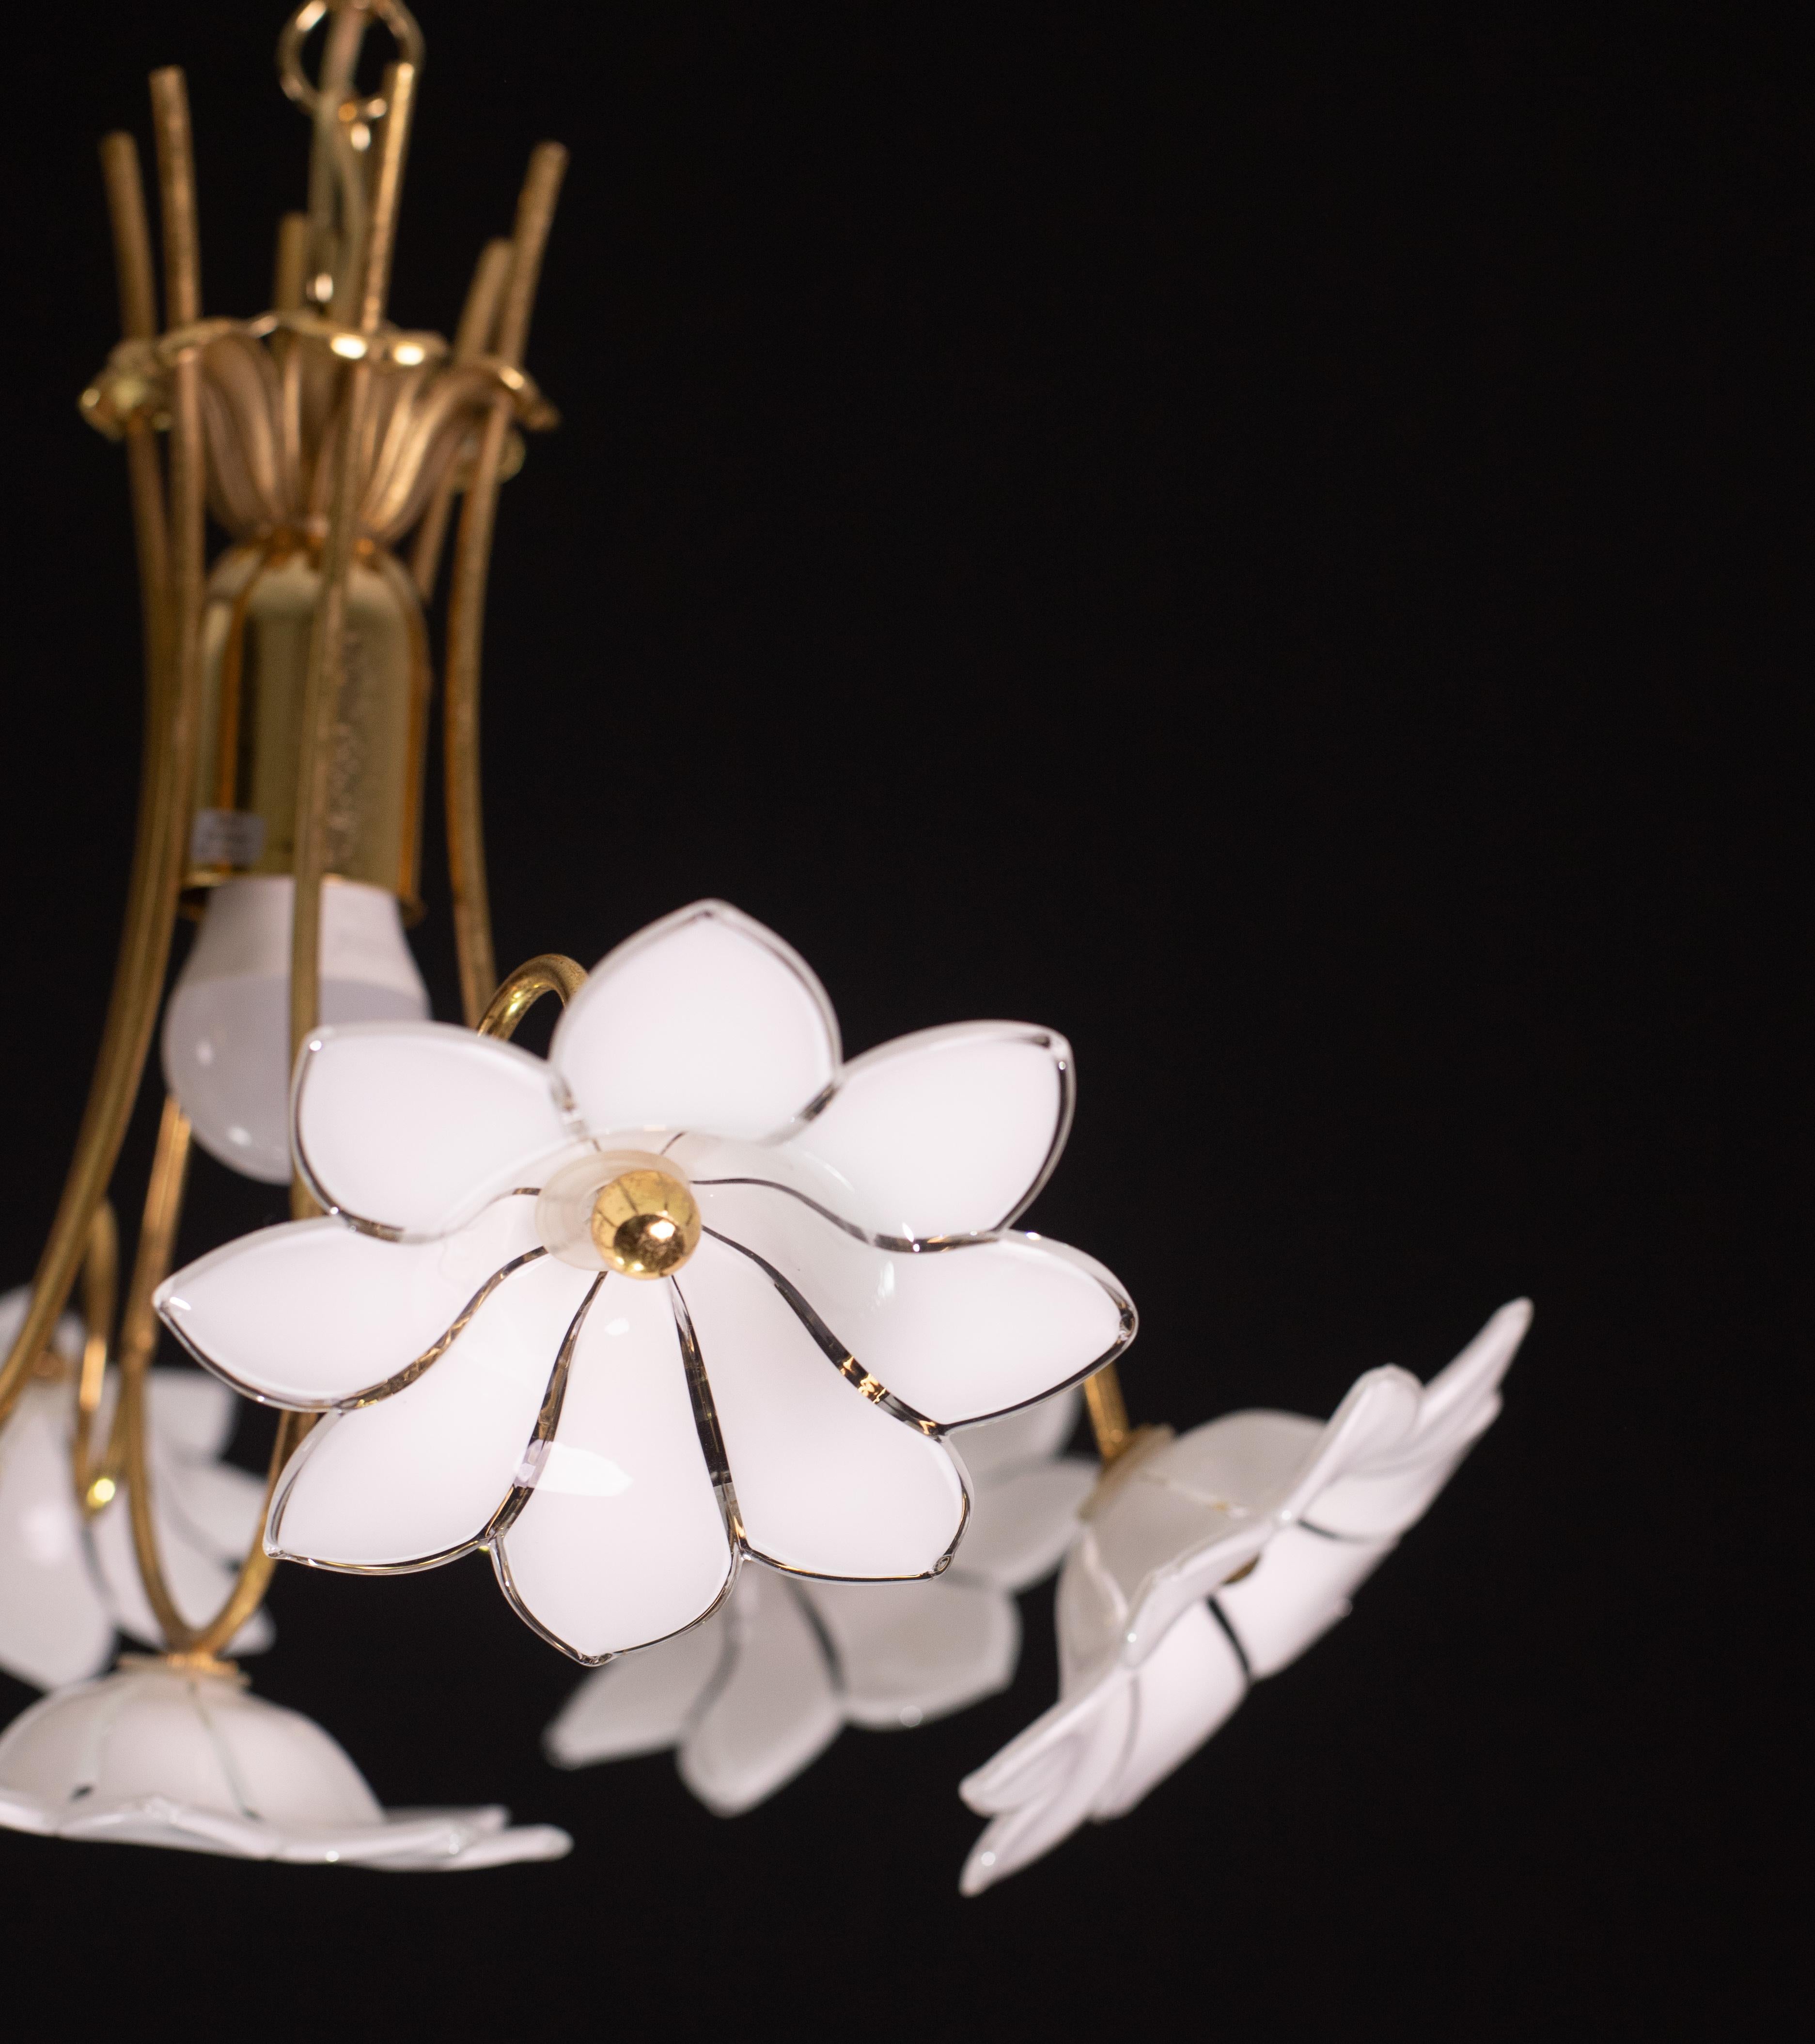 Petite Murano Vintage Chandelier White Flowers, 1970 For Sale 2